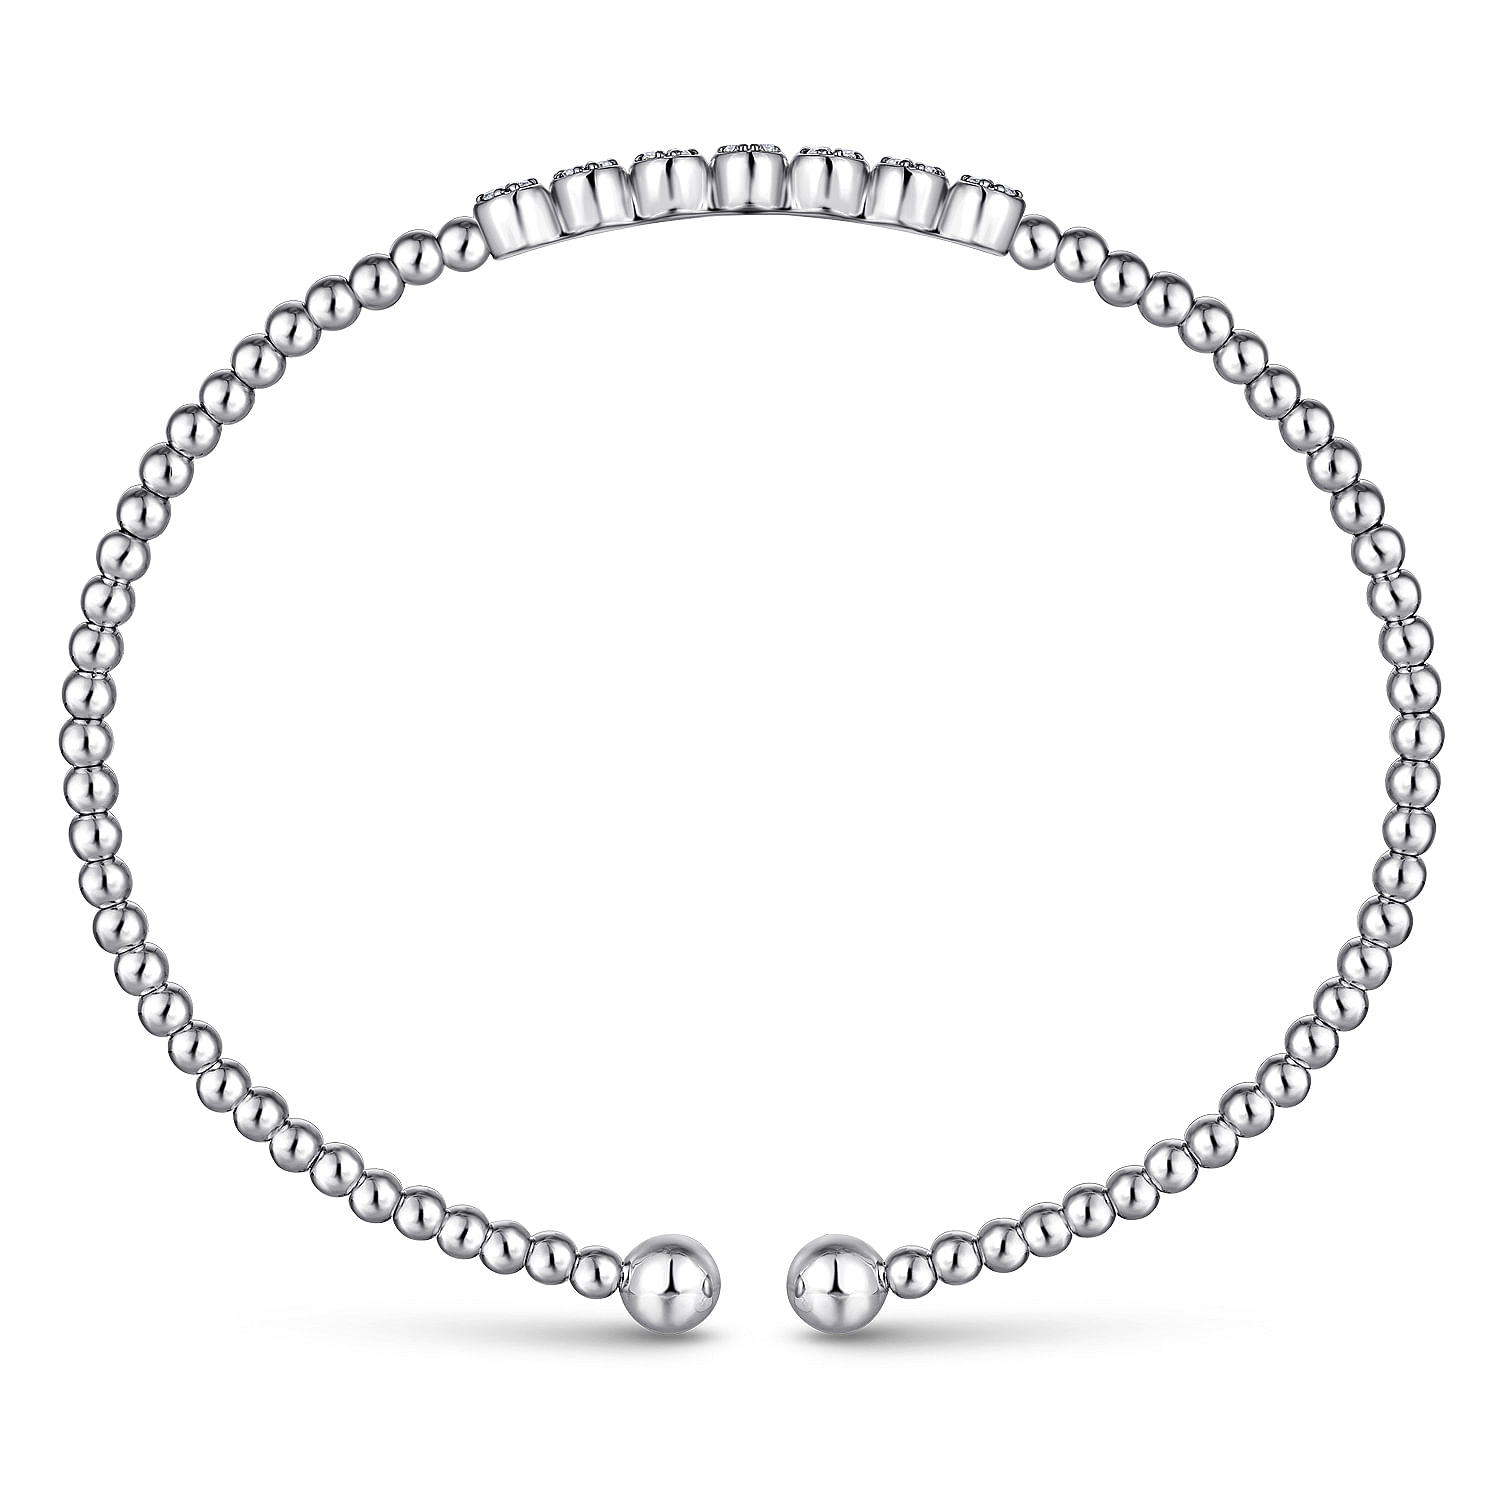 14K White Gold Bujukan Bead Cuff Bracelet with Cluster Diamond Stations - 0.13 ct - Shot 3